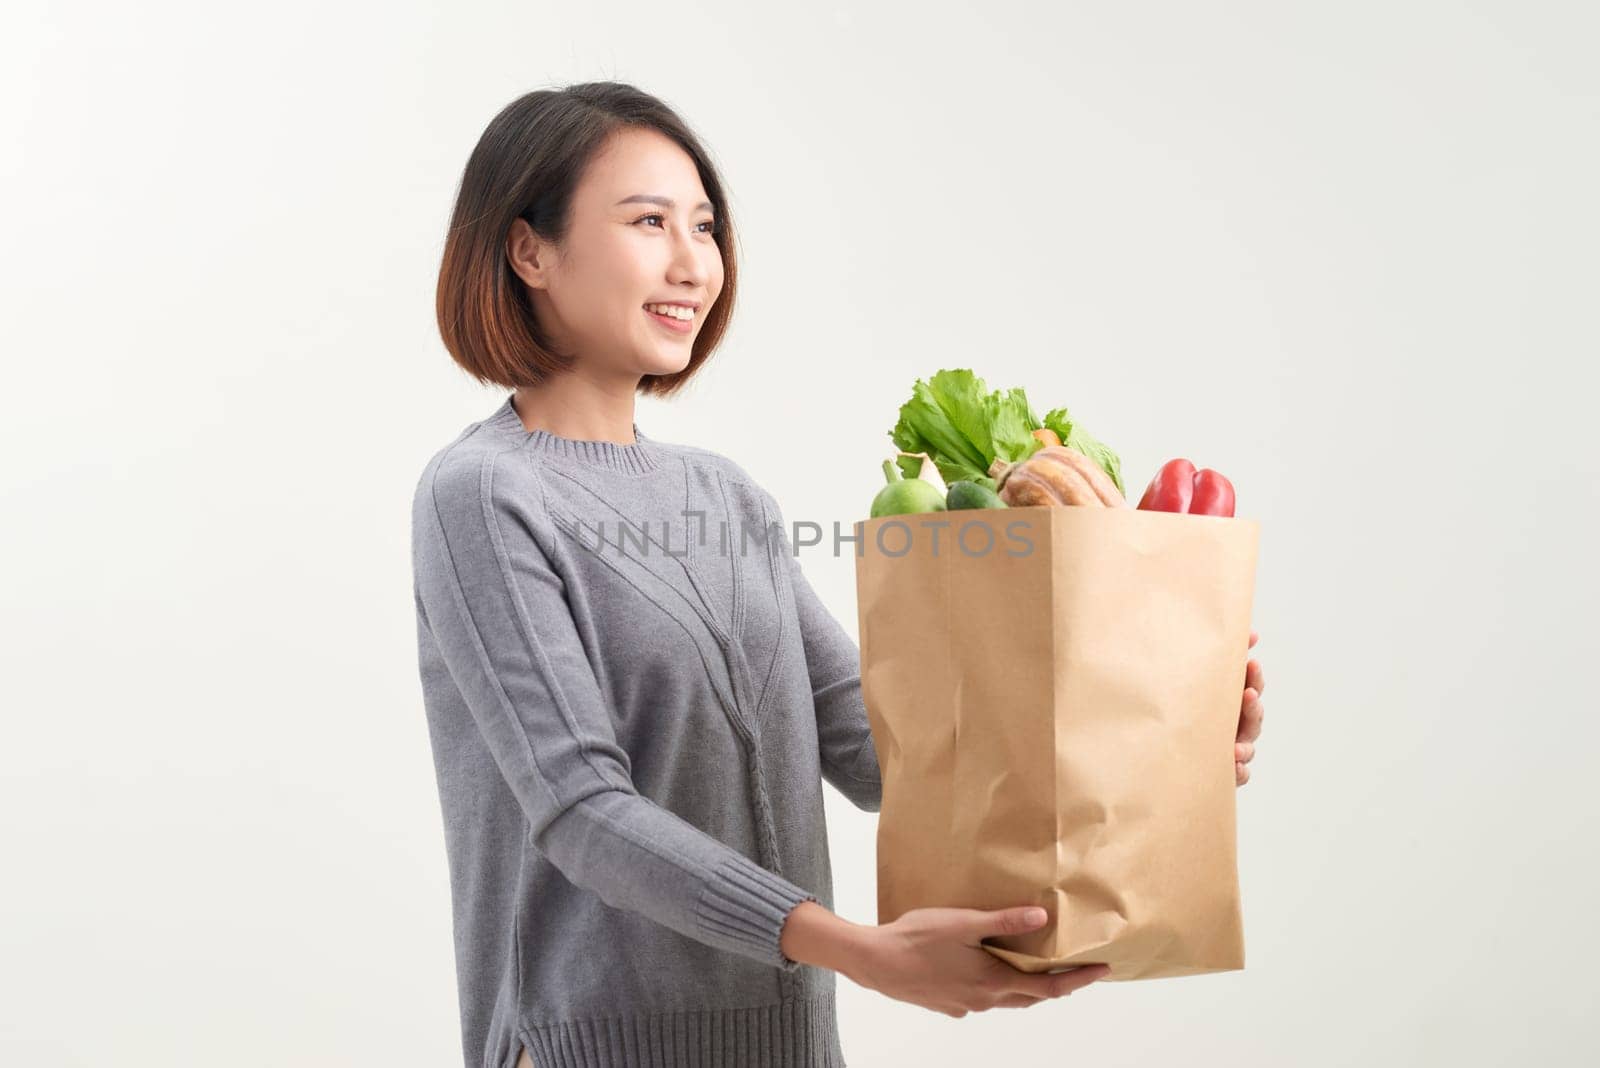 Young woman with a grocery shopping bag. Isolated on white background.